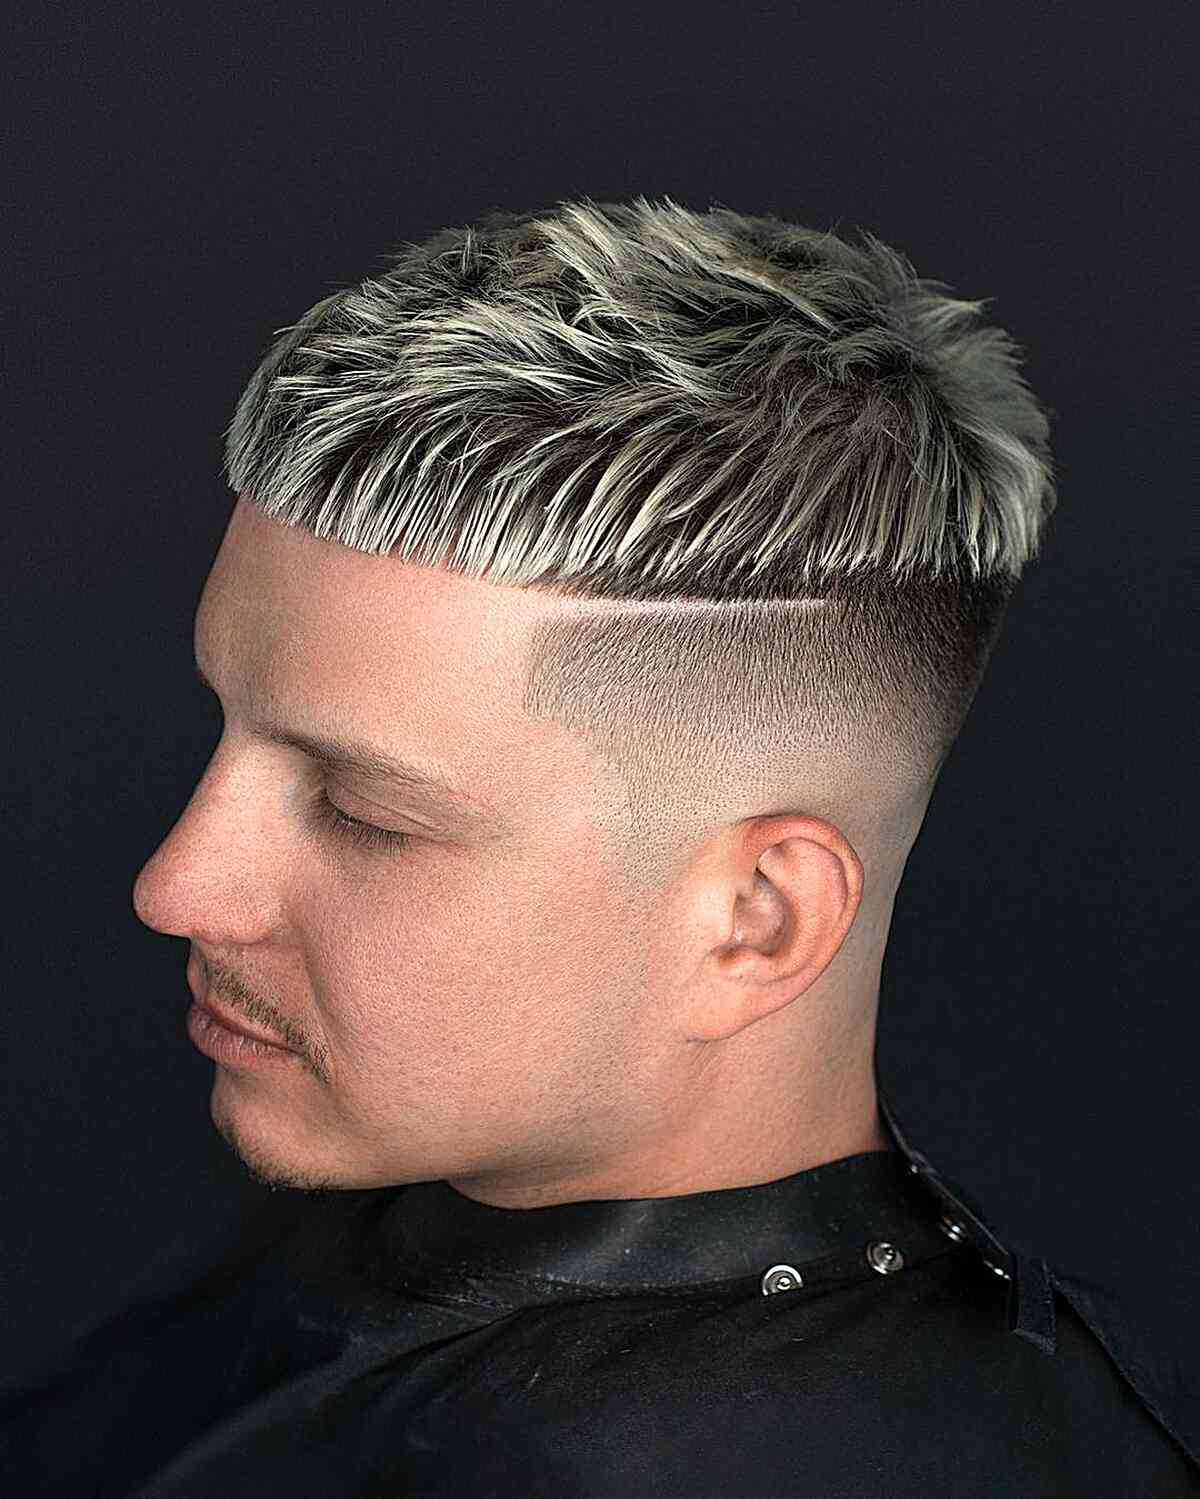 Blonde Highlights with a Sharp Line Design for Men with Thick Hair